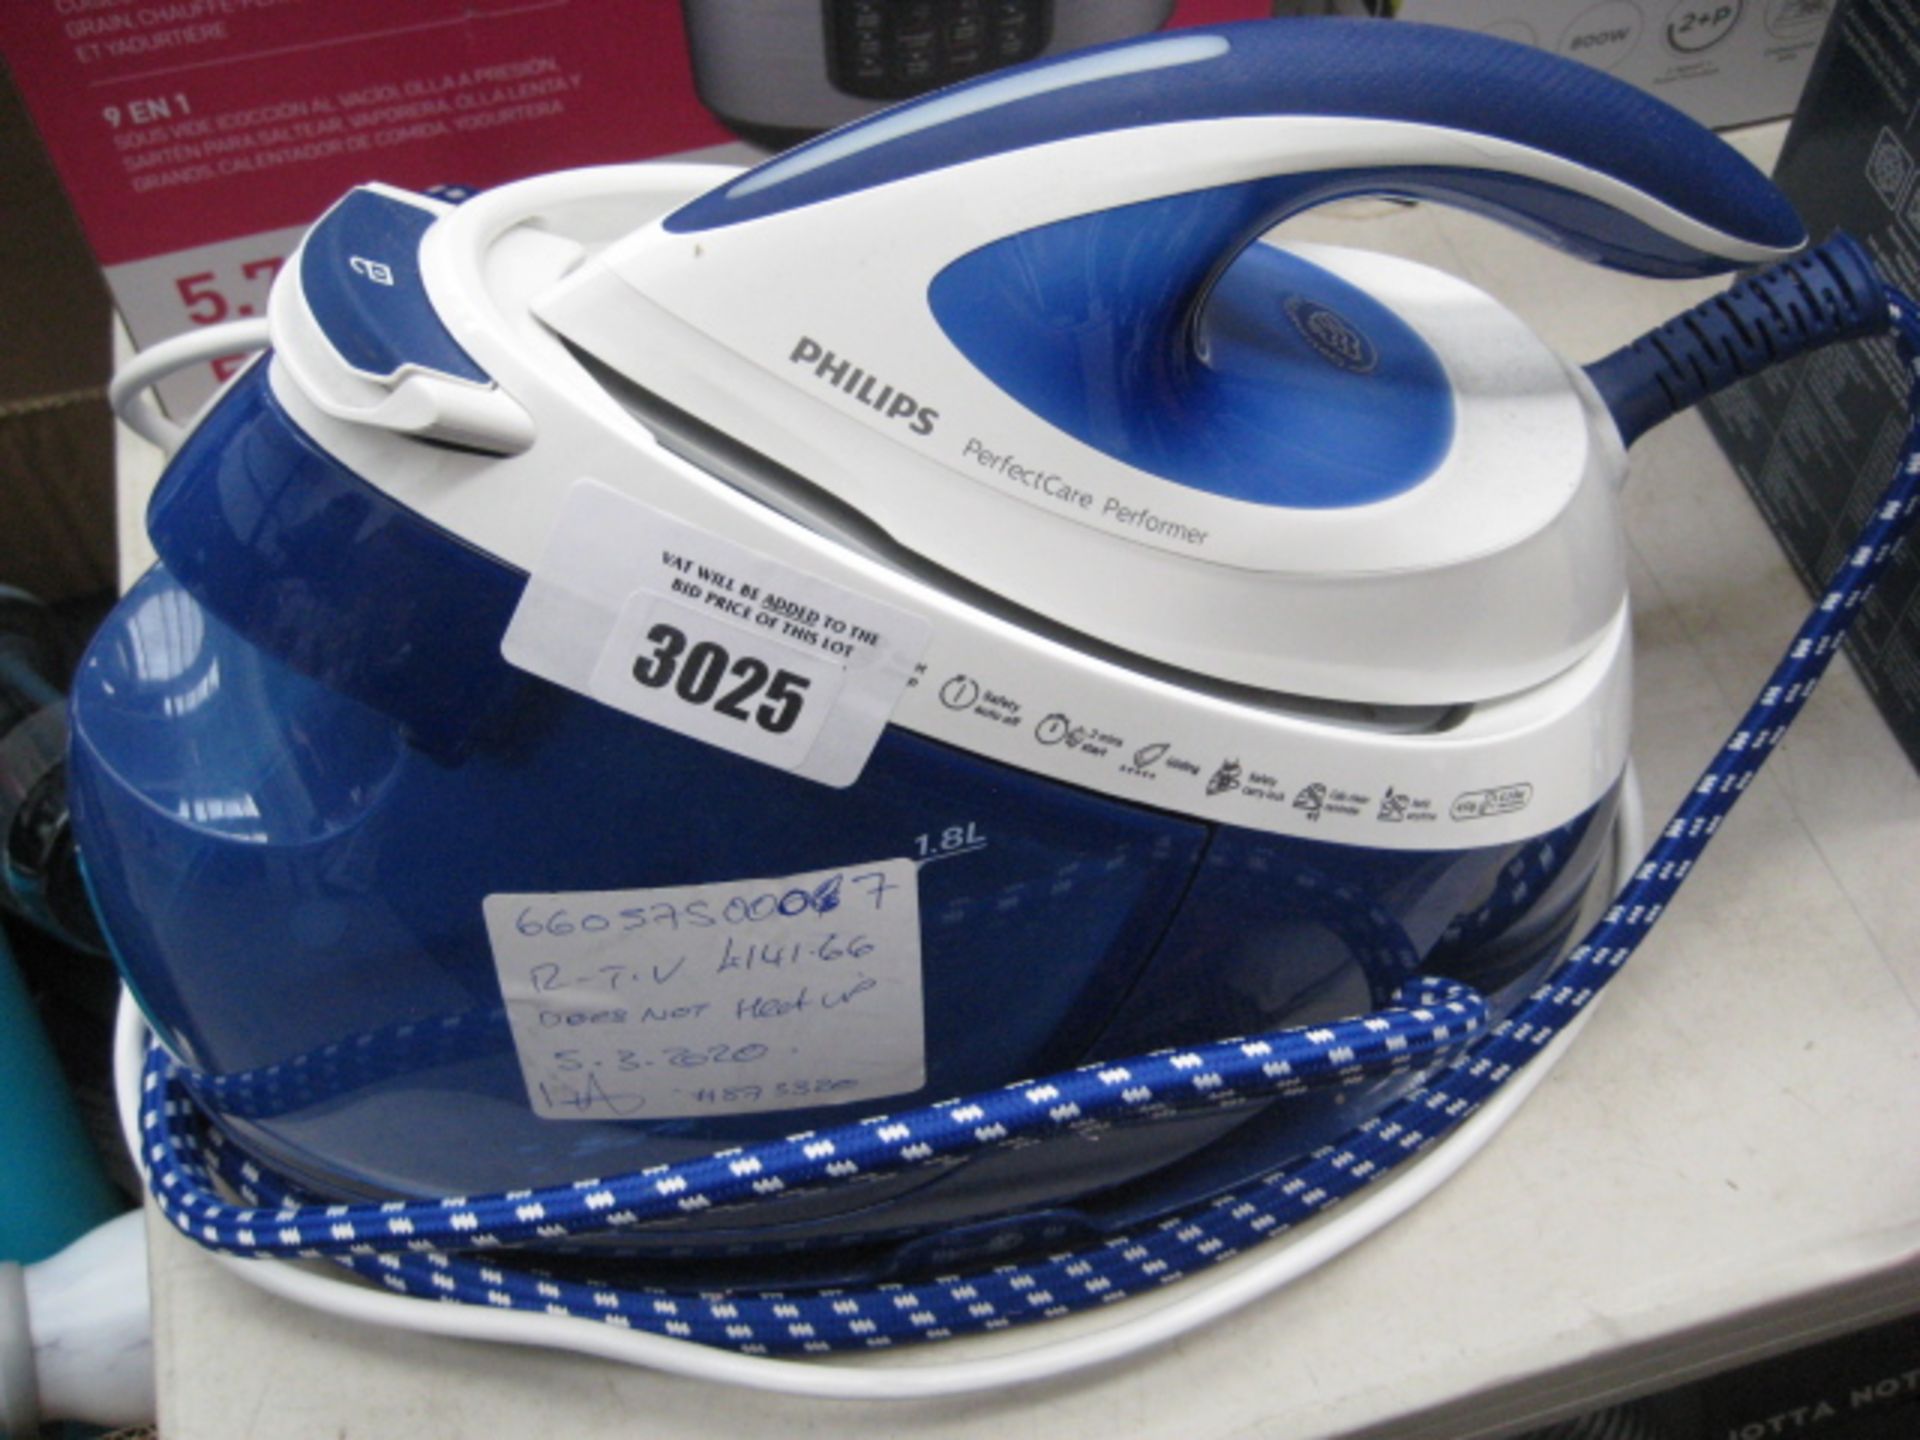 Unboxed Philips steamer iron